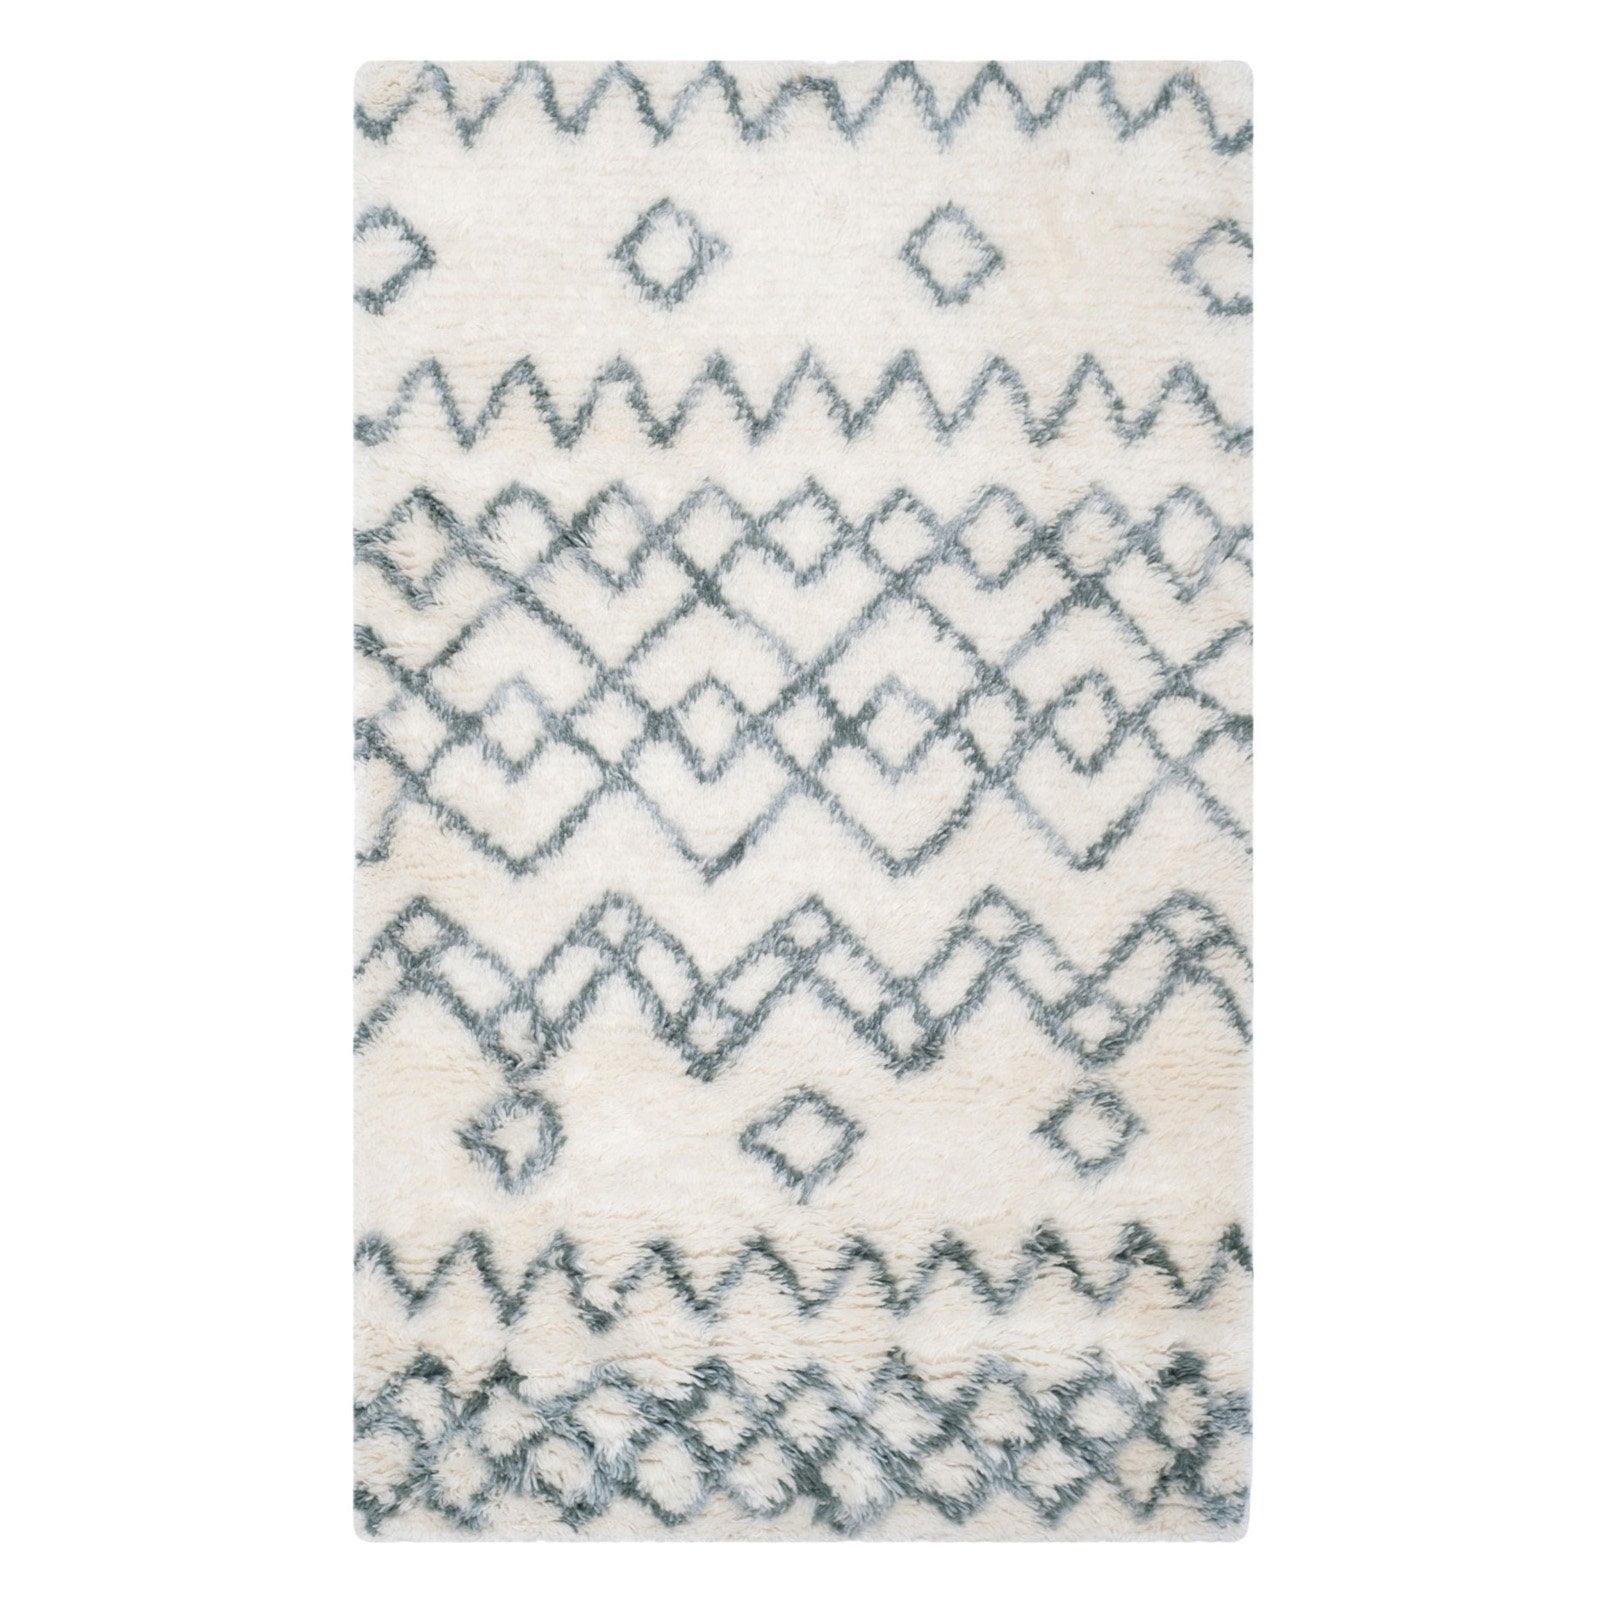 Ivory and Blue Hand-Tufted Wool Shag Rug, 8' x 10'